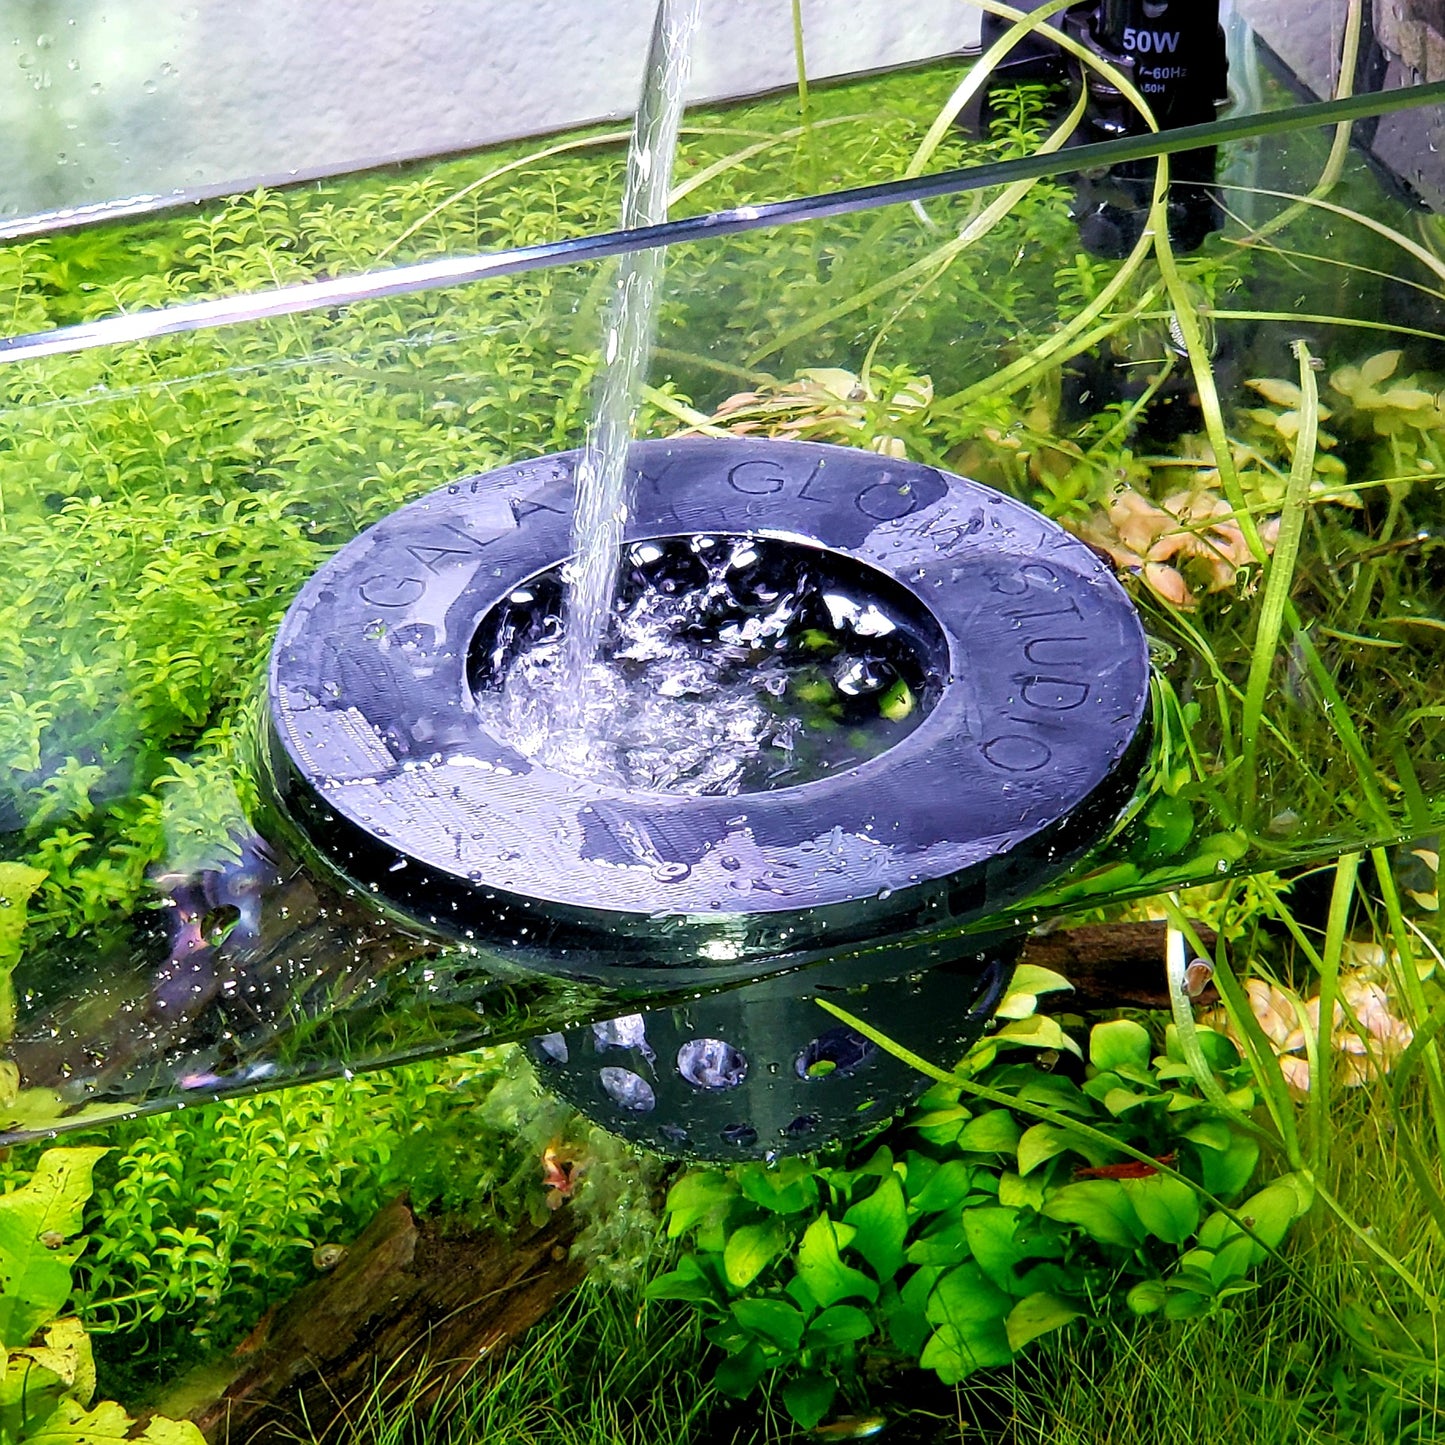 Floating Water Change Diffuser & Top Off Diffuser - Aquarium Safe 3D Printed ABS Plastic